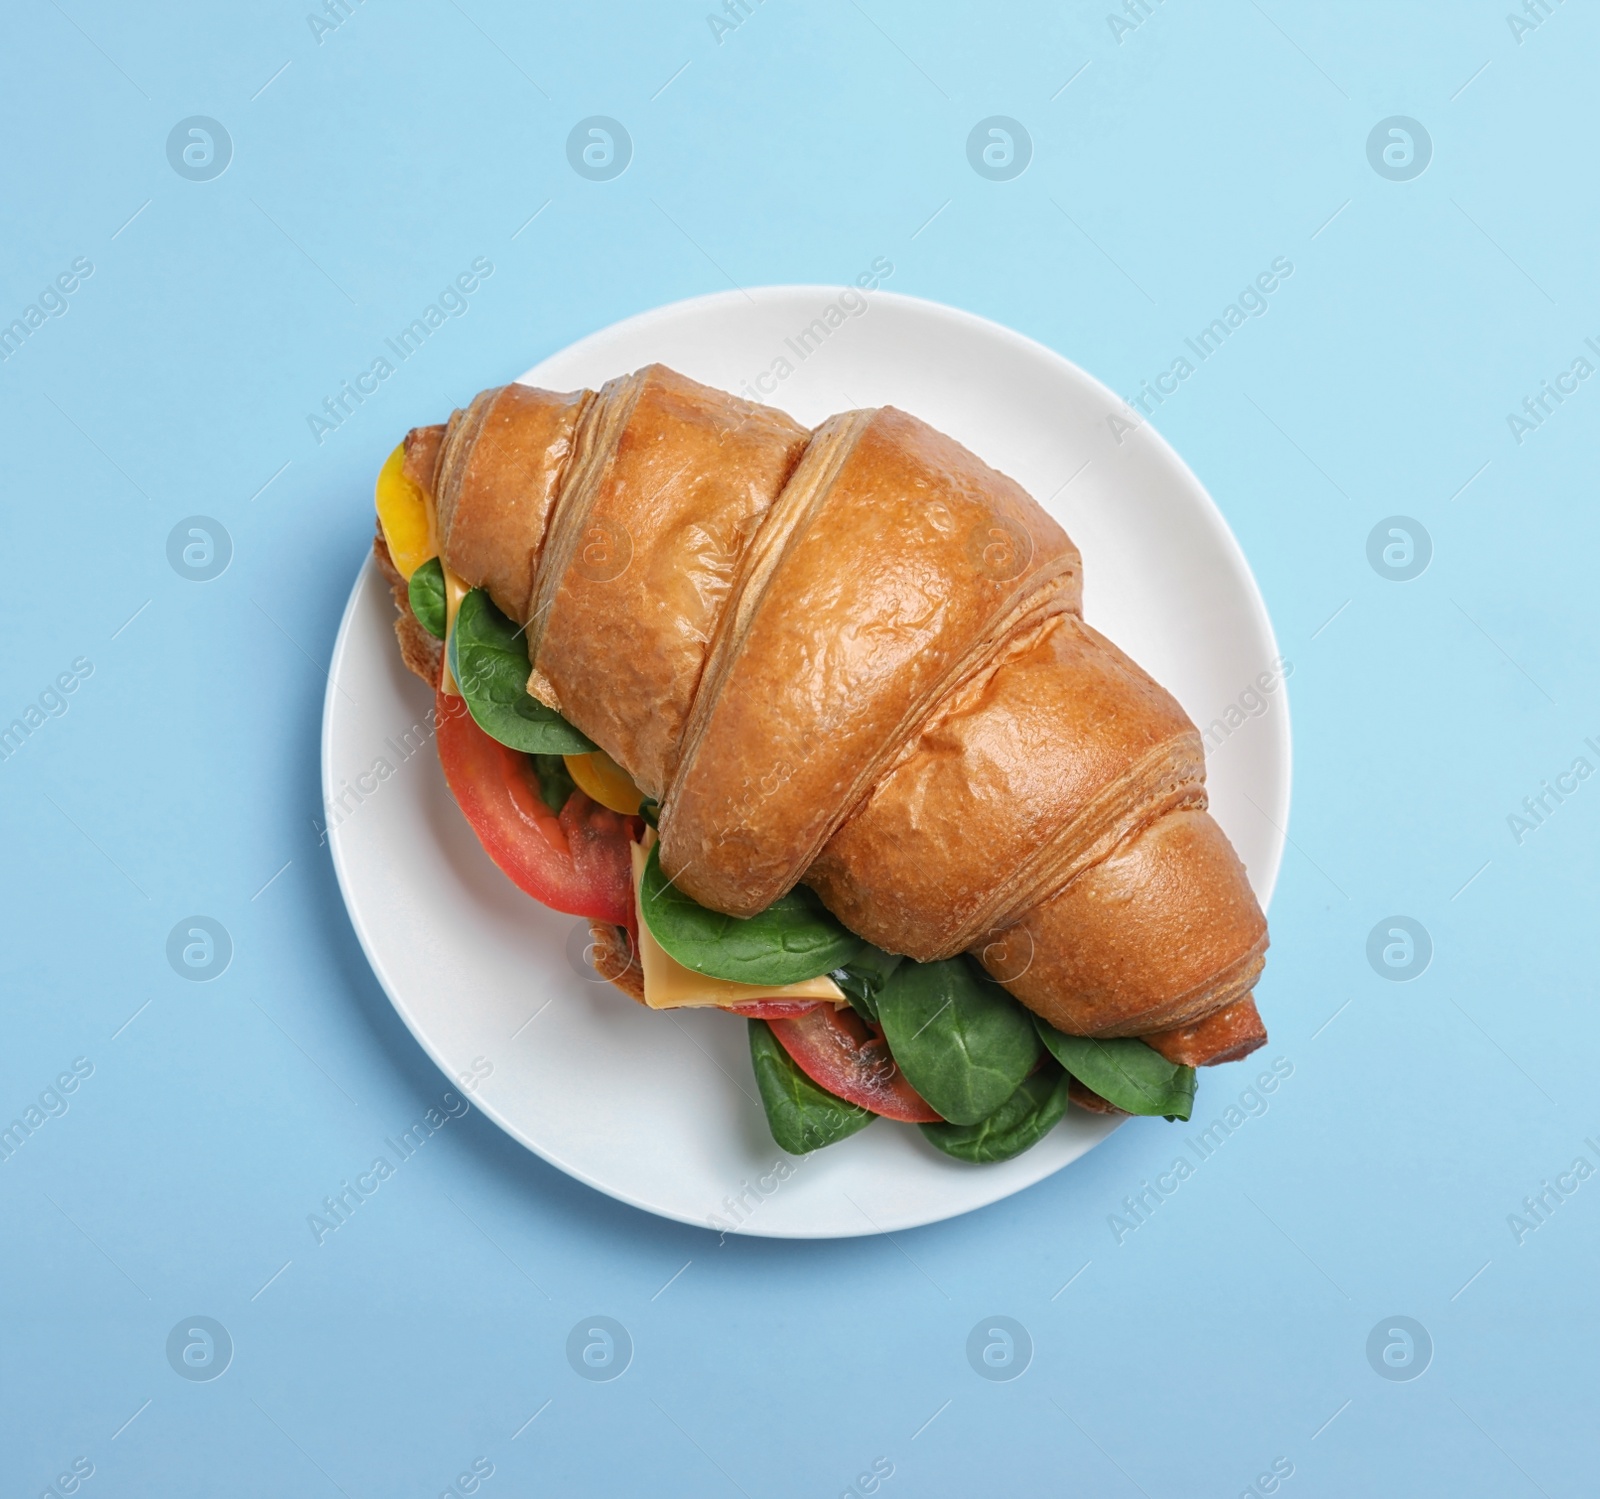 Photo of Tasty vegetarian croissant sandwich on light blue background, top view